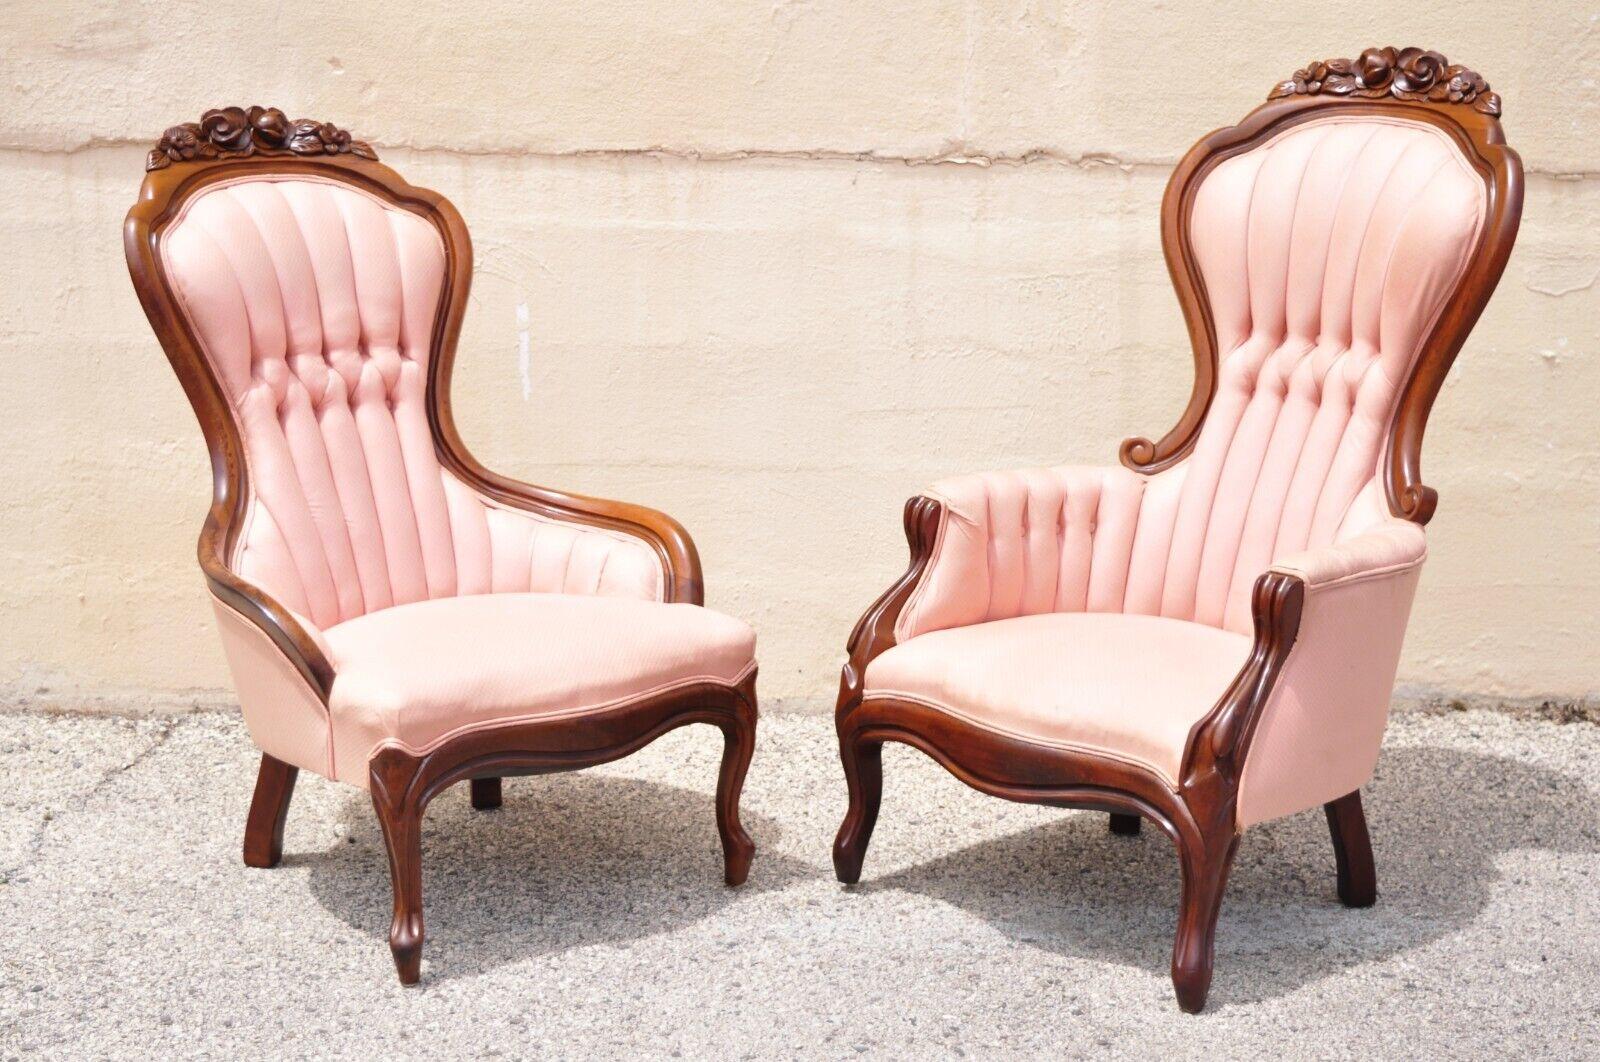 Vintage Victorian style his and hers rose carved fireside lounge chairs - a pair. Item features His and Hers size, pink tufted upholstery, channel backs, rose flower carved pediments, solid wood frames, very nice vintage set, great style and form.